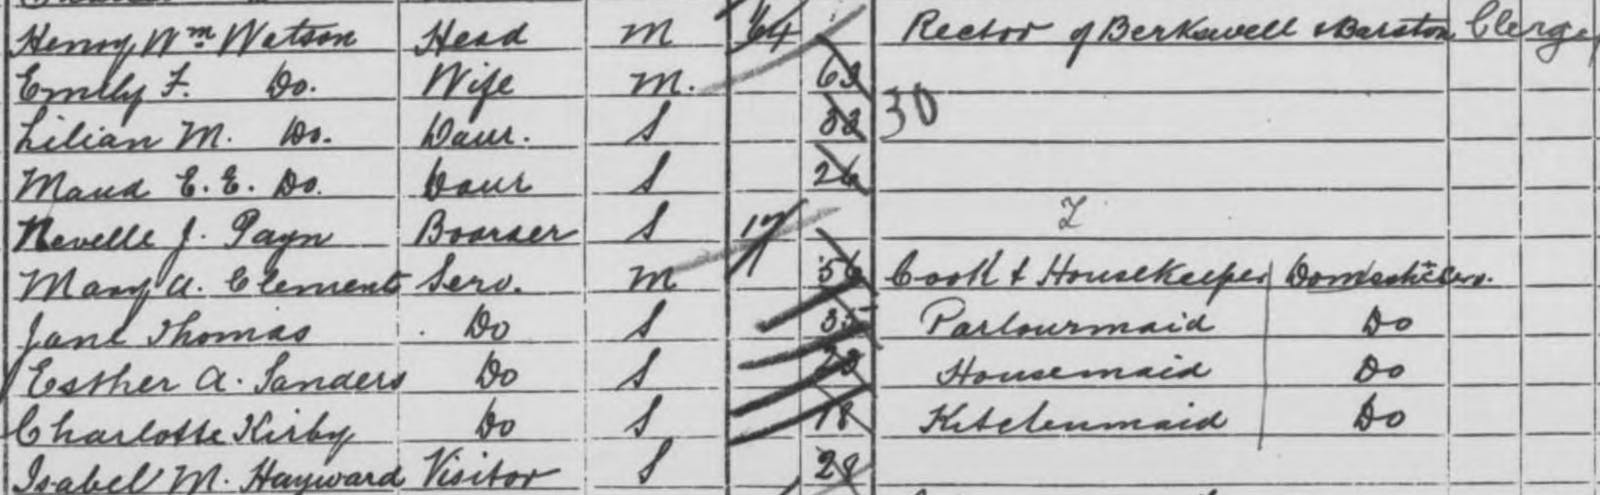 Maud Watson's census record from 1891